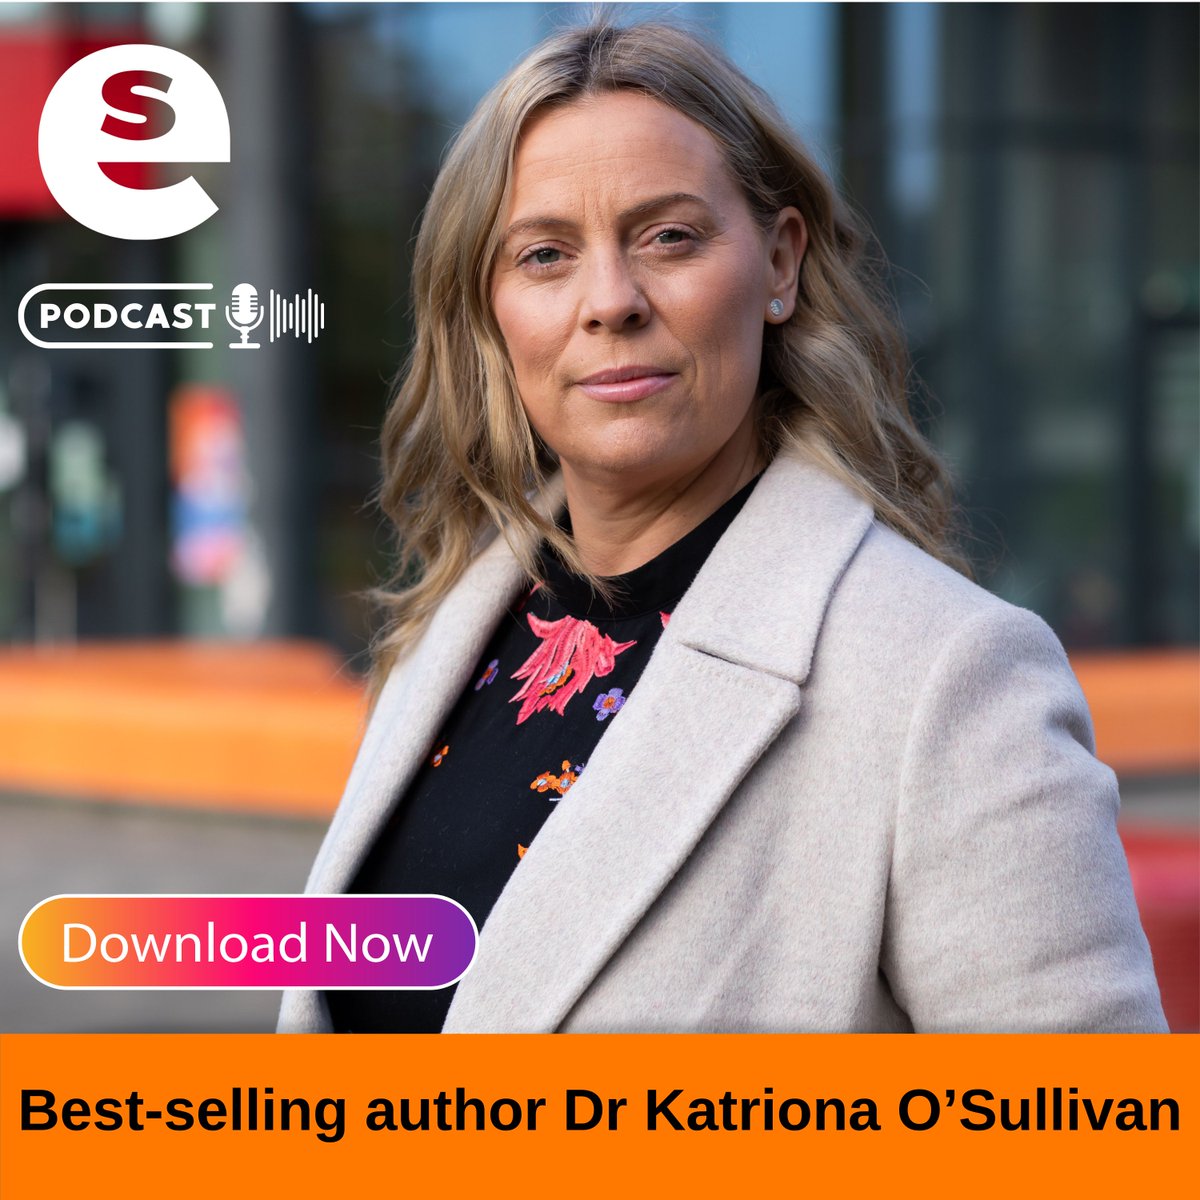 Now available! In 'The Learning Conversations' podcast, best- selling author Dr Katriona O'Sullivan @katrionaos & Chief Exec Gillian Hamilton @GGillHHam1 talk about how trauma might present itself in the classroom & how teachers can help make a difference: educationscotland.podbean.com/e/katriona-osu…